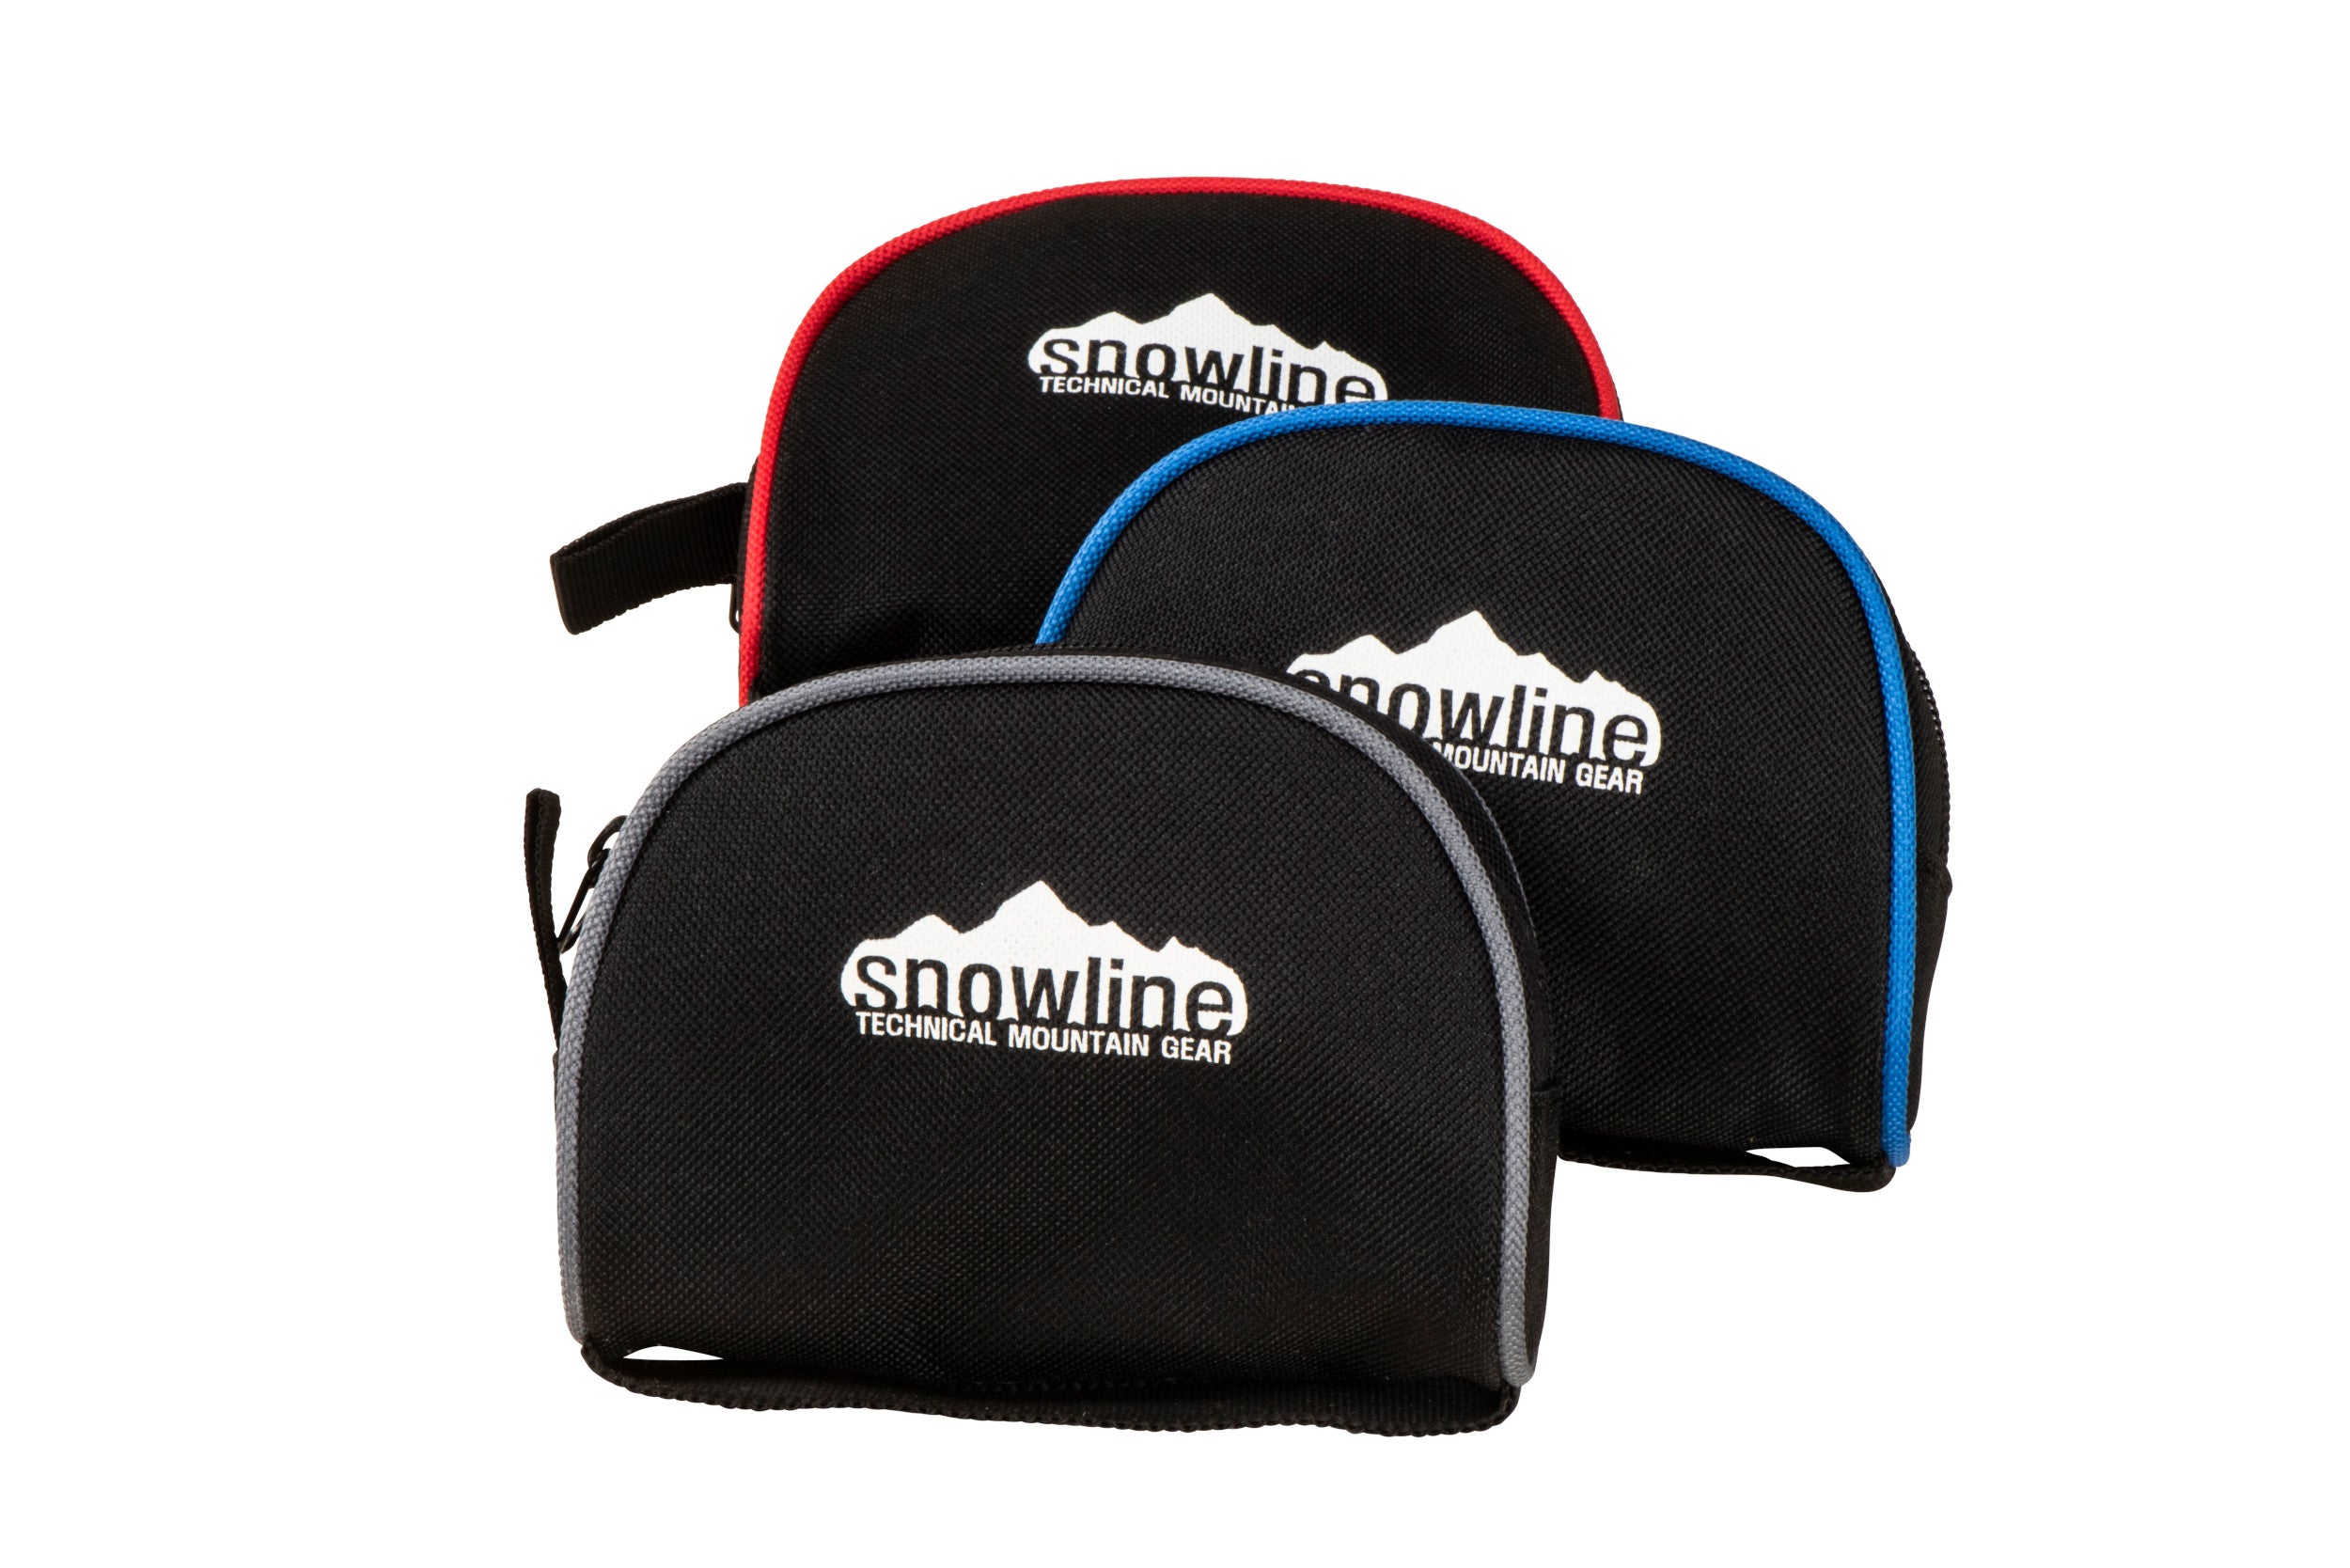 Snowline Chainsen Pro spikes for rough usage from Snowline Technical  Mountain Gear 